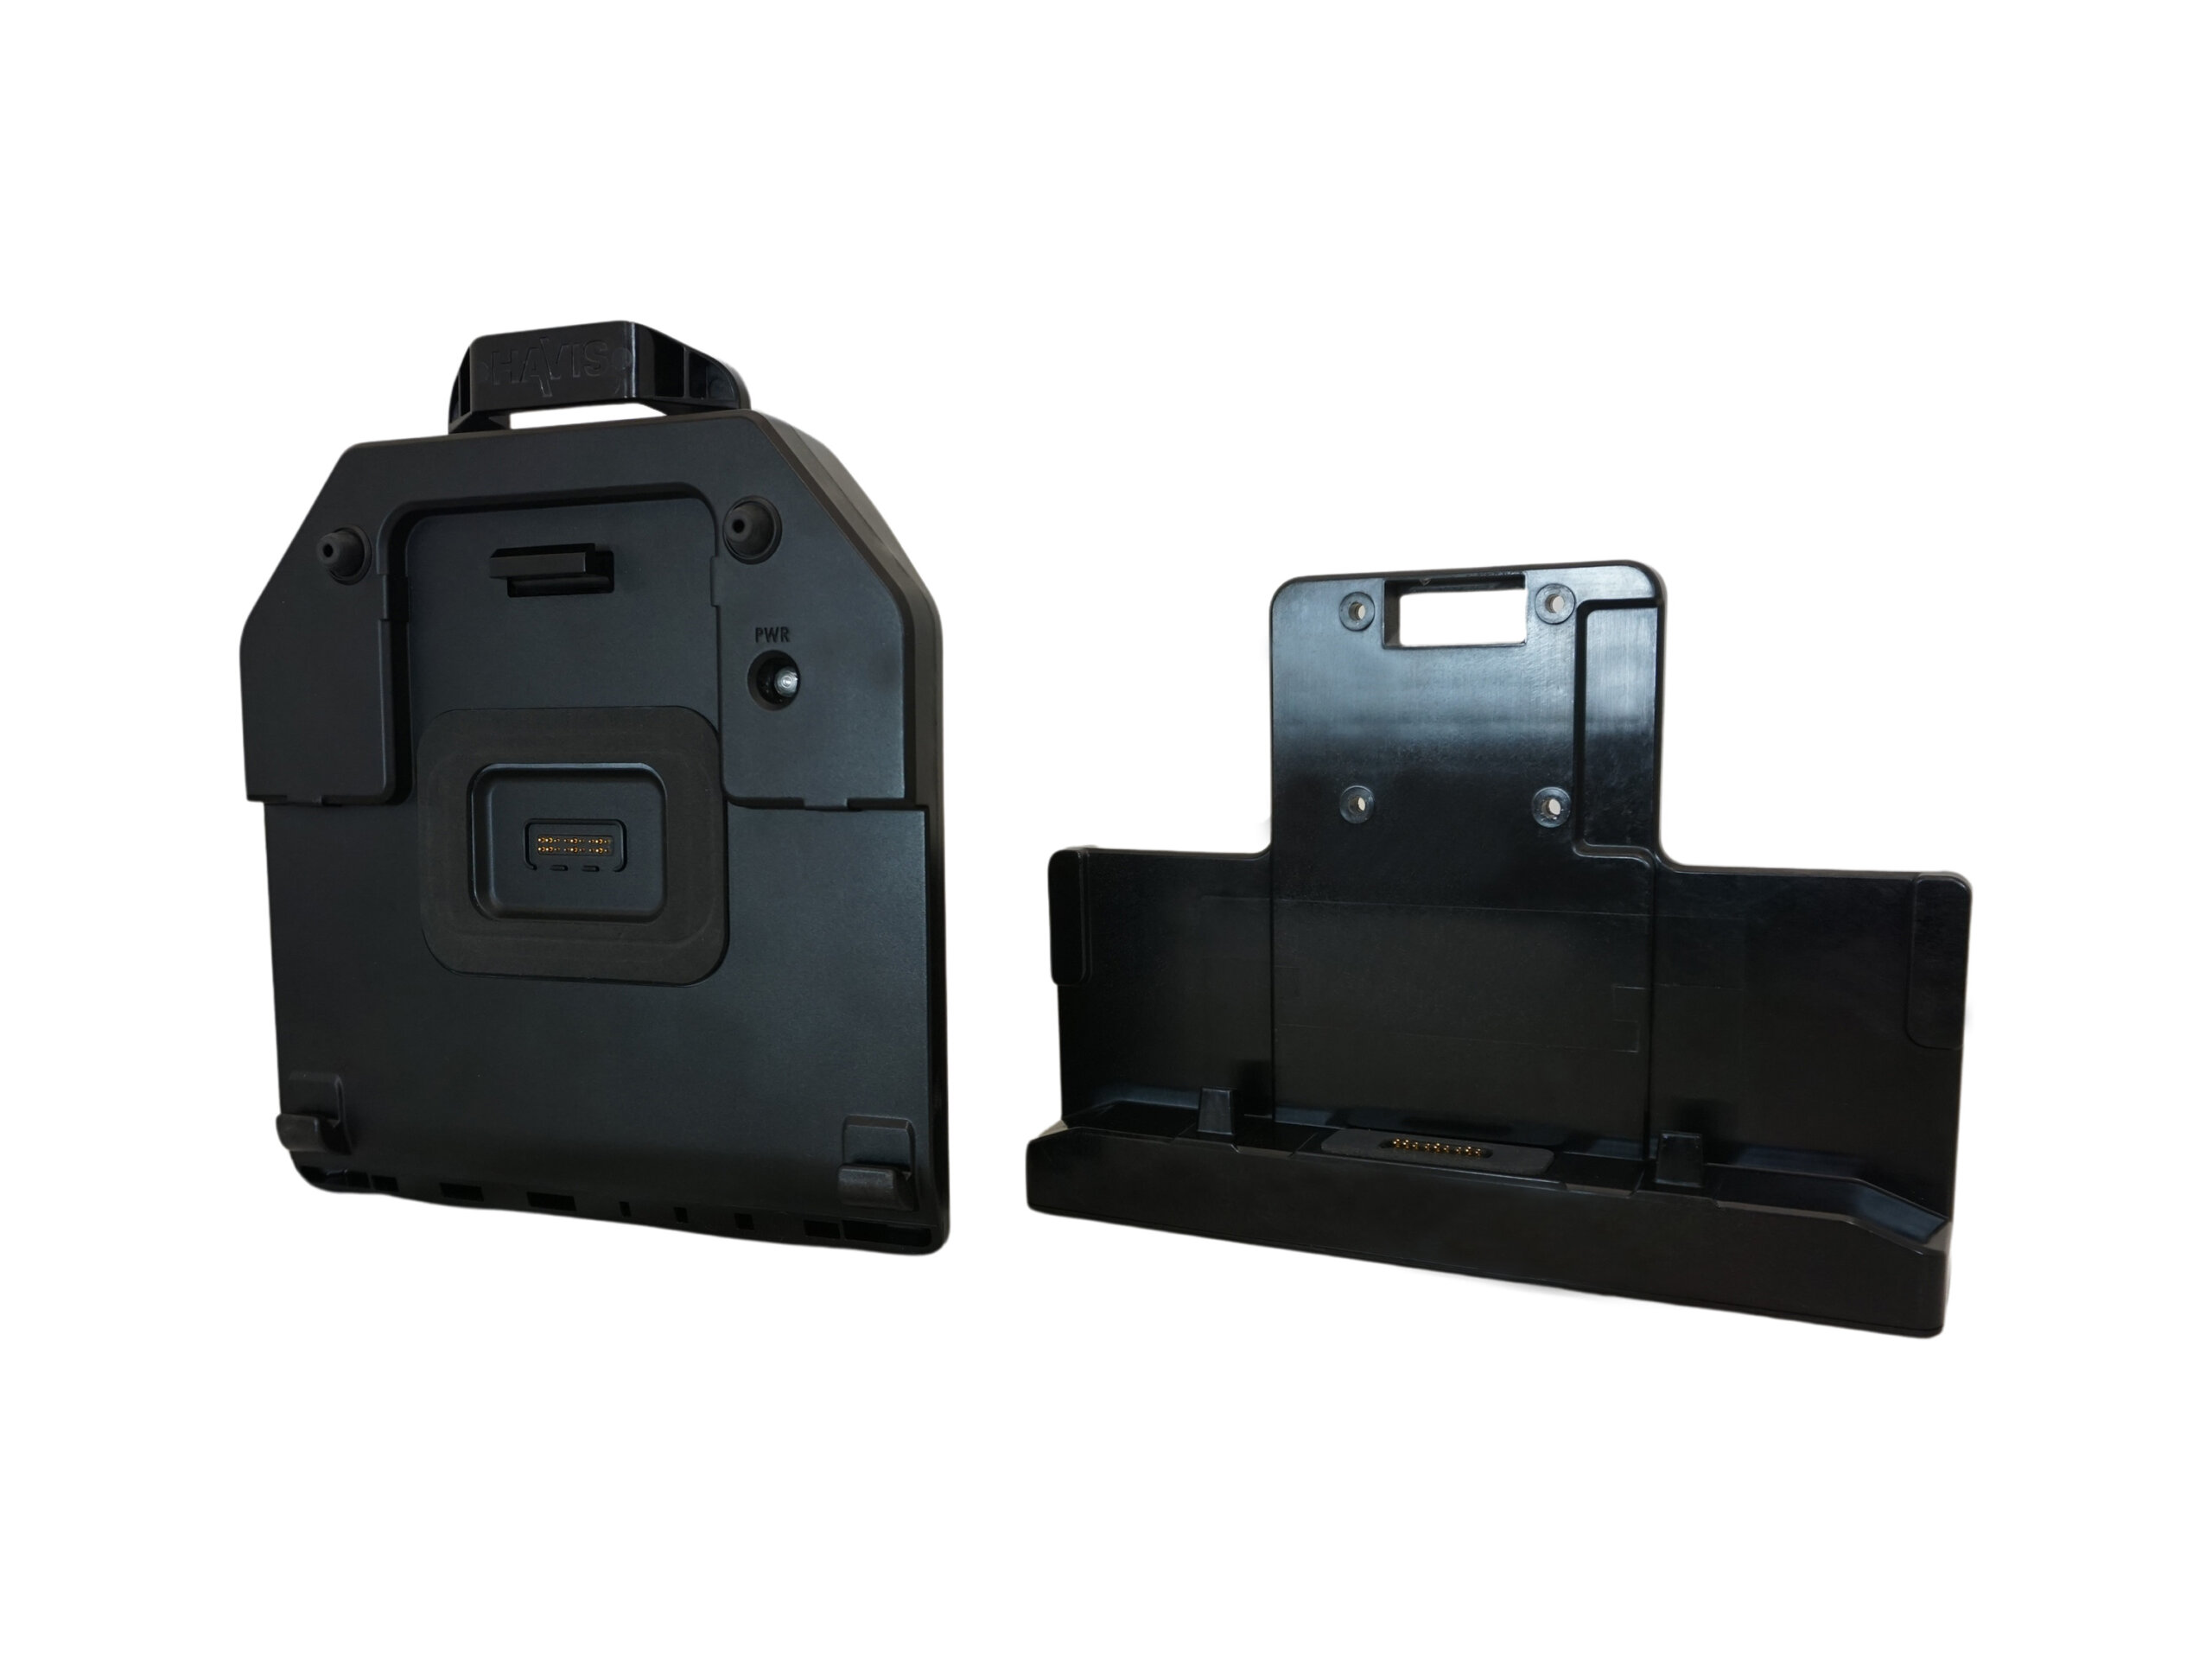 PACKAGE – IP65 Docking Solution for Dell’s 7030 Tablet with Internal, Non-isolated Power Supply (9-36VDC)